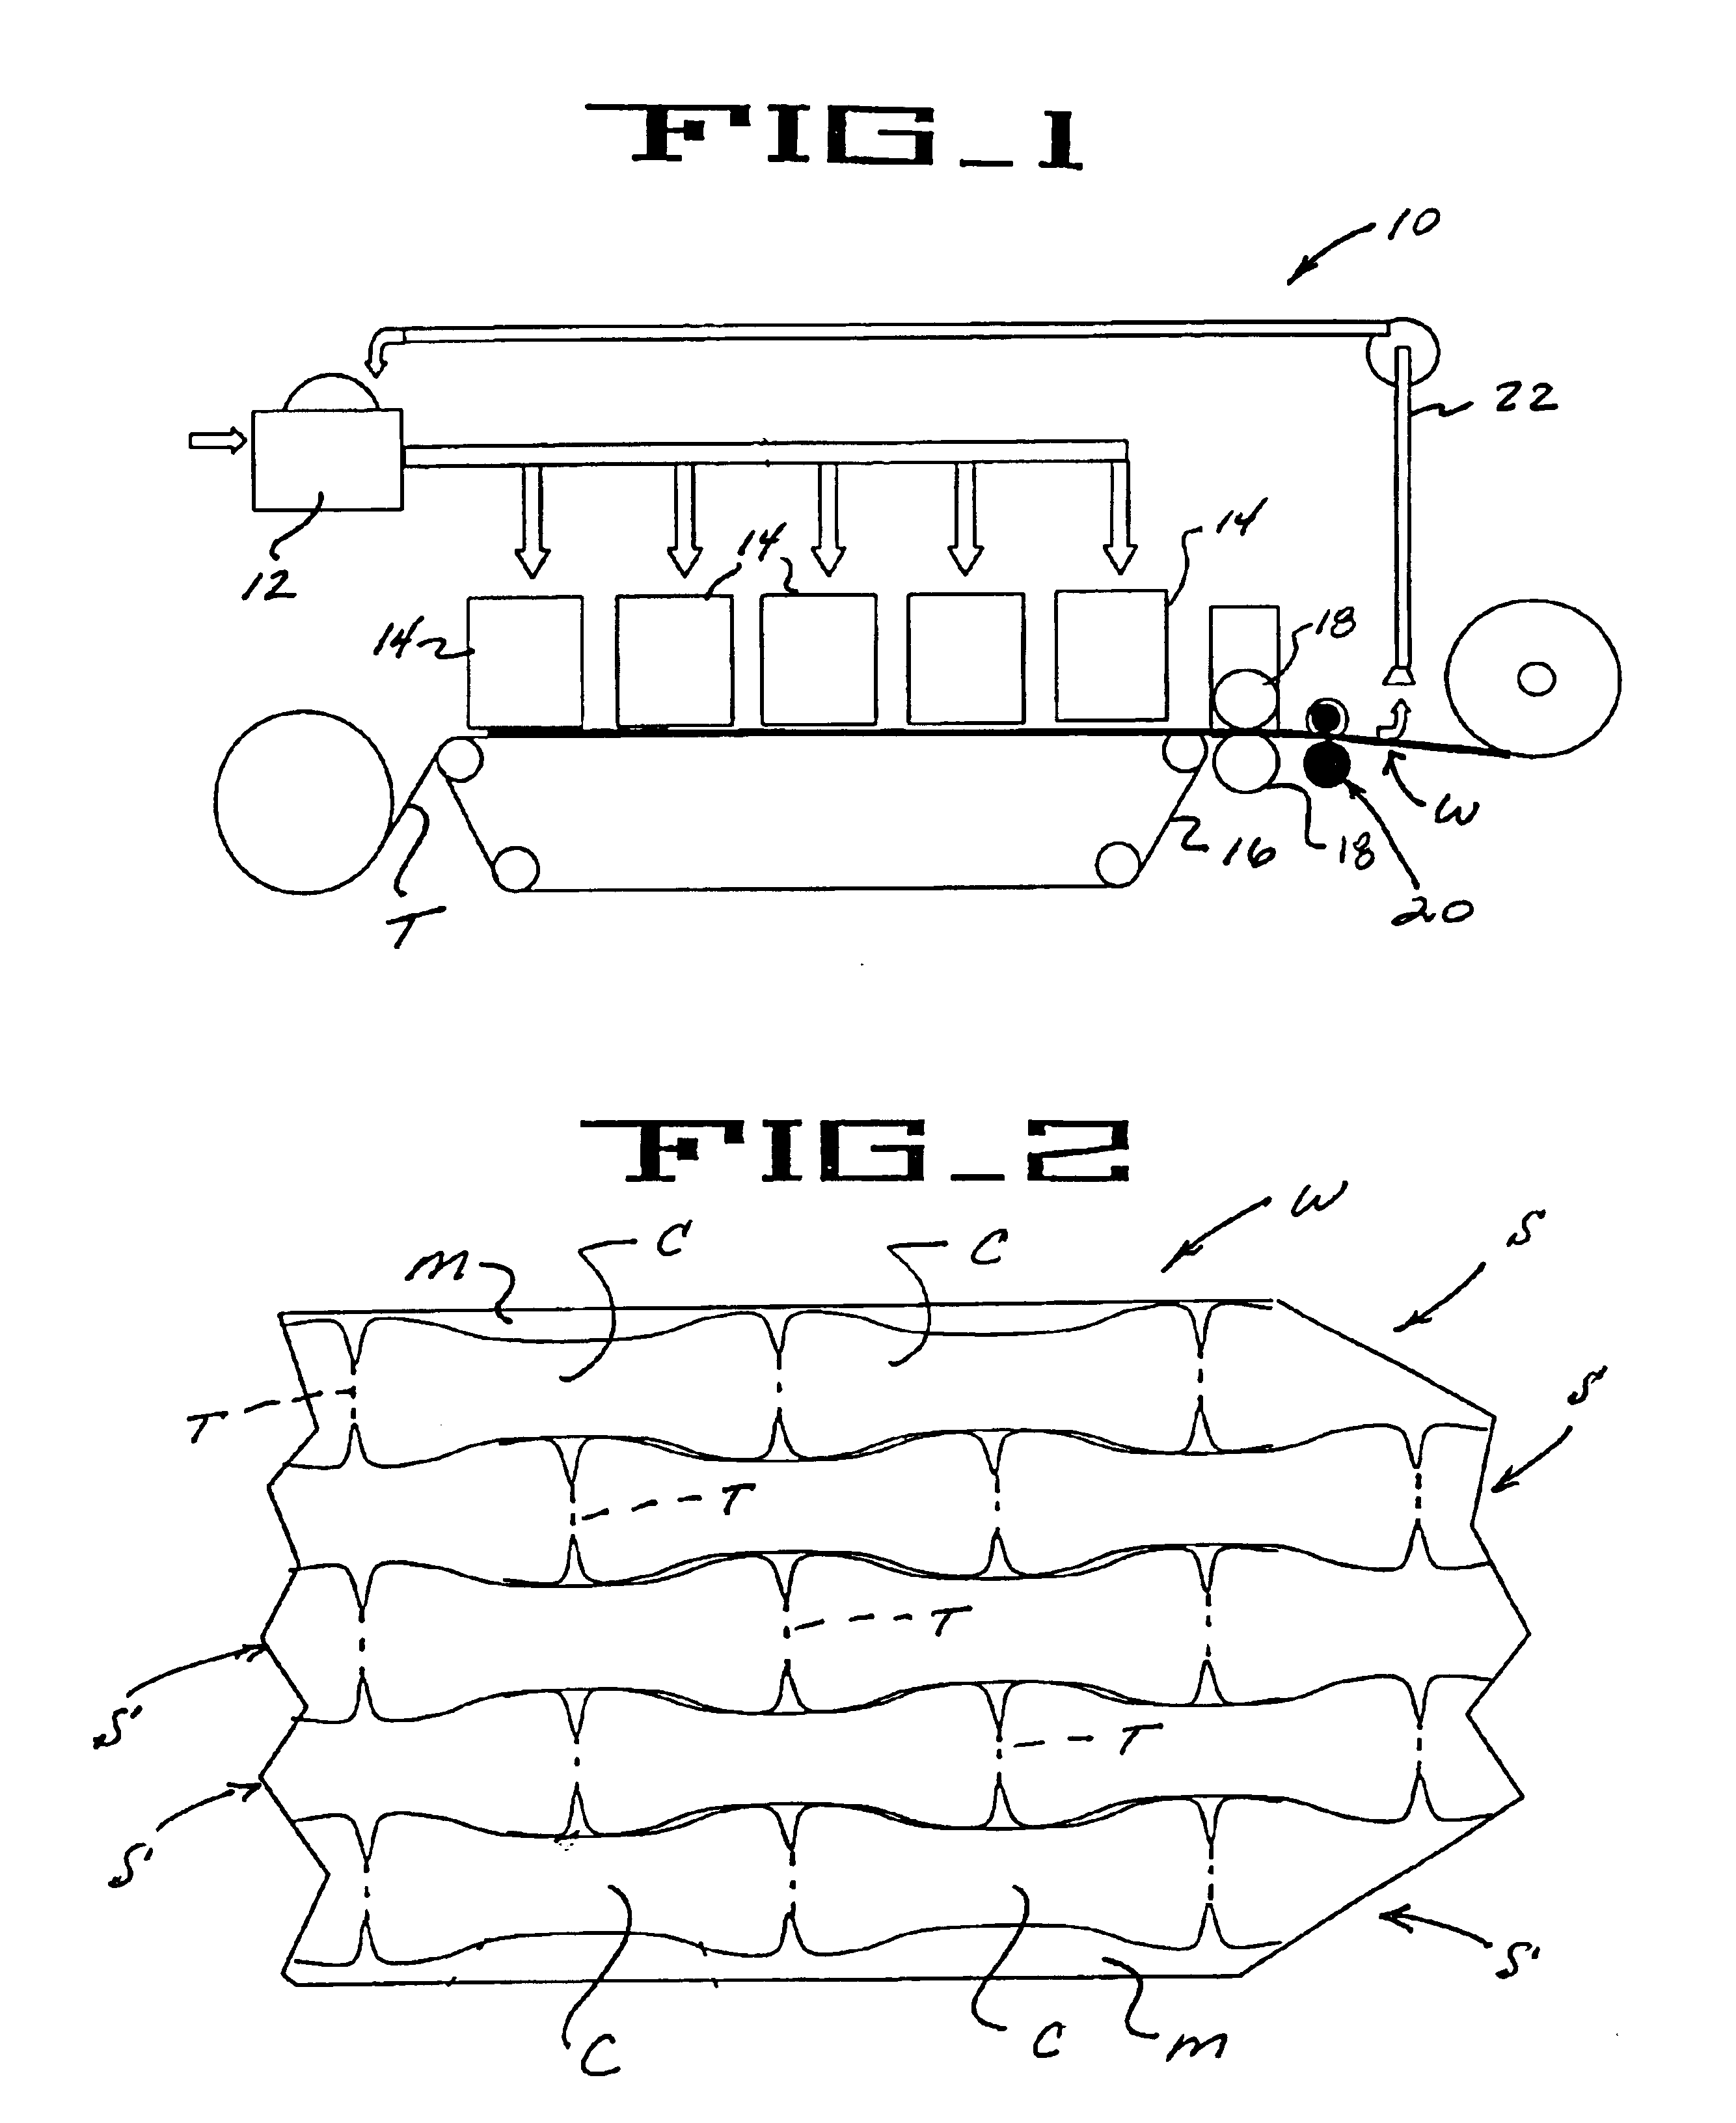 Method of making shaped components for disposable absorbent articles